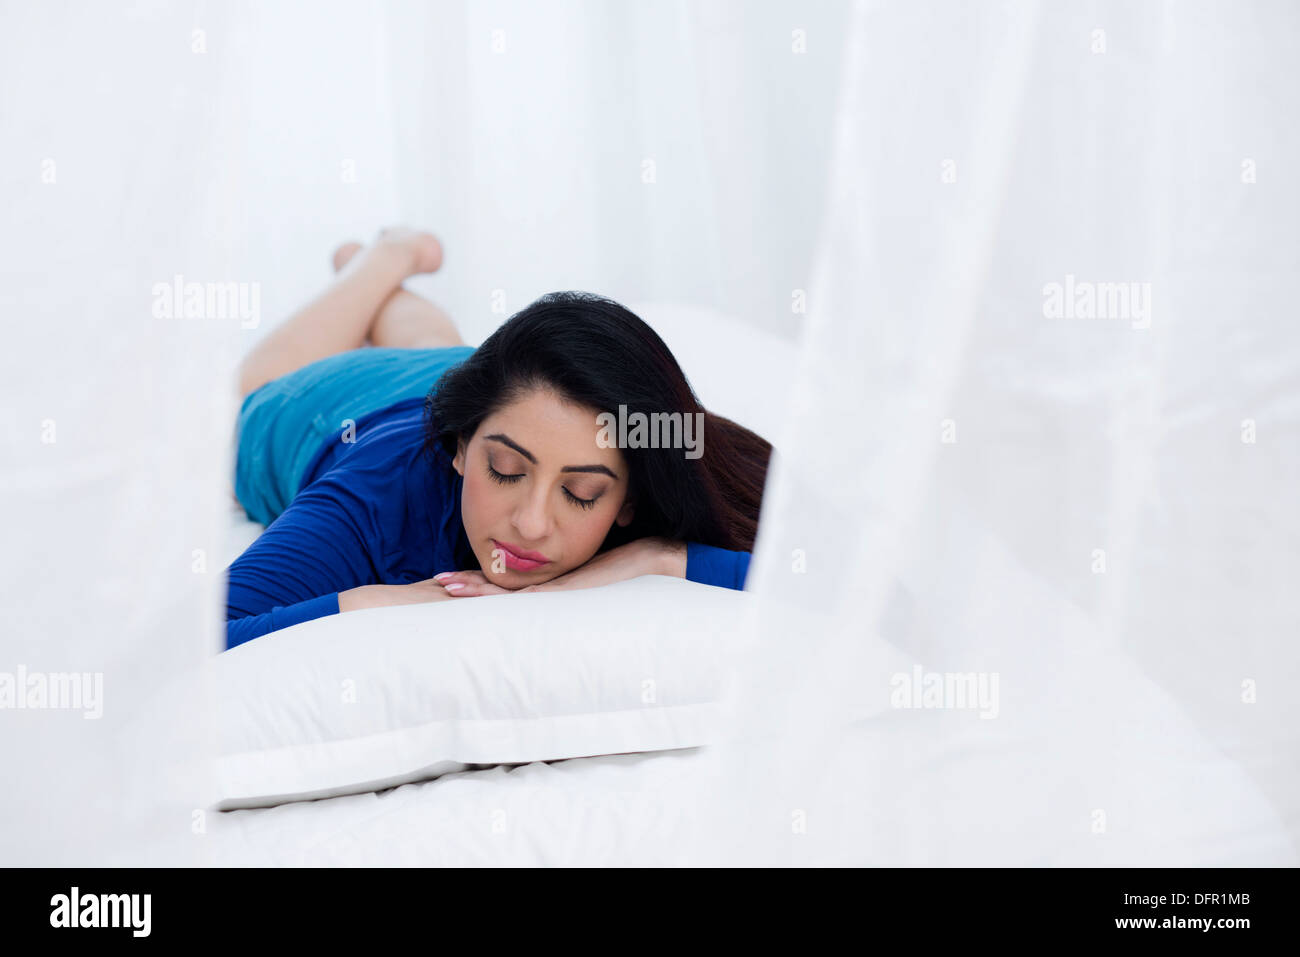 Woman sleeping on the bed Stock Photo